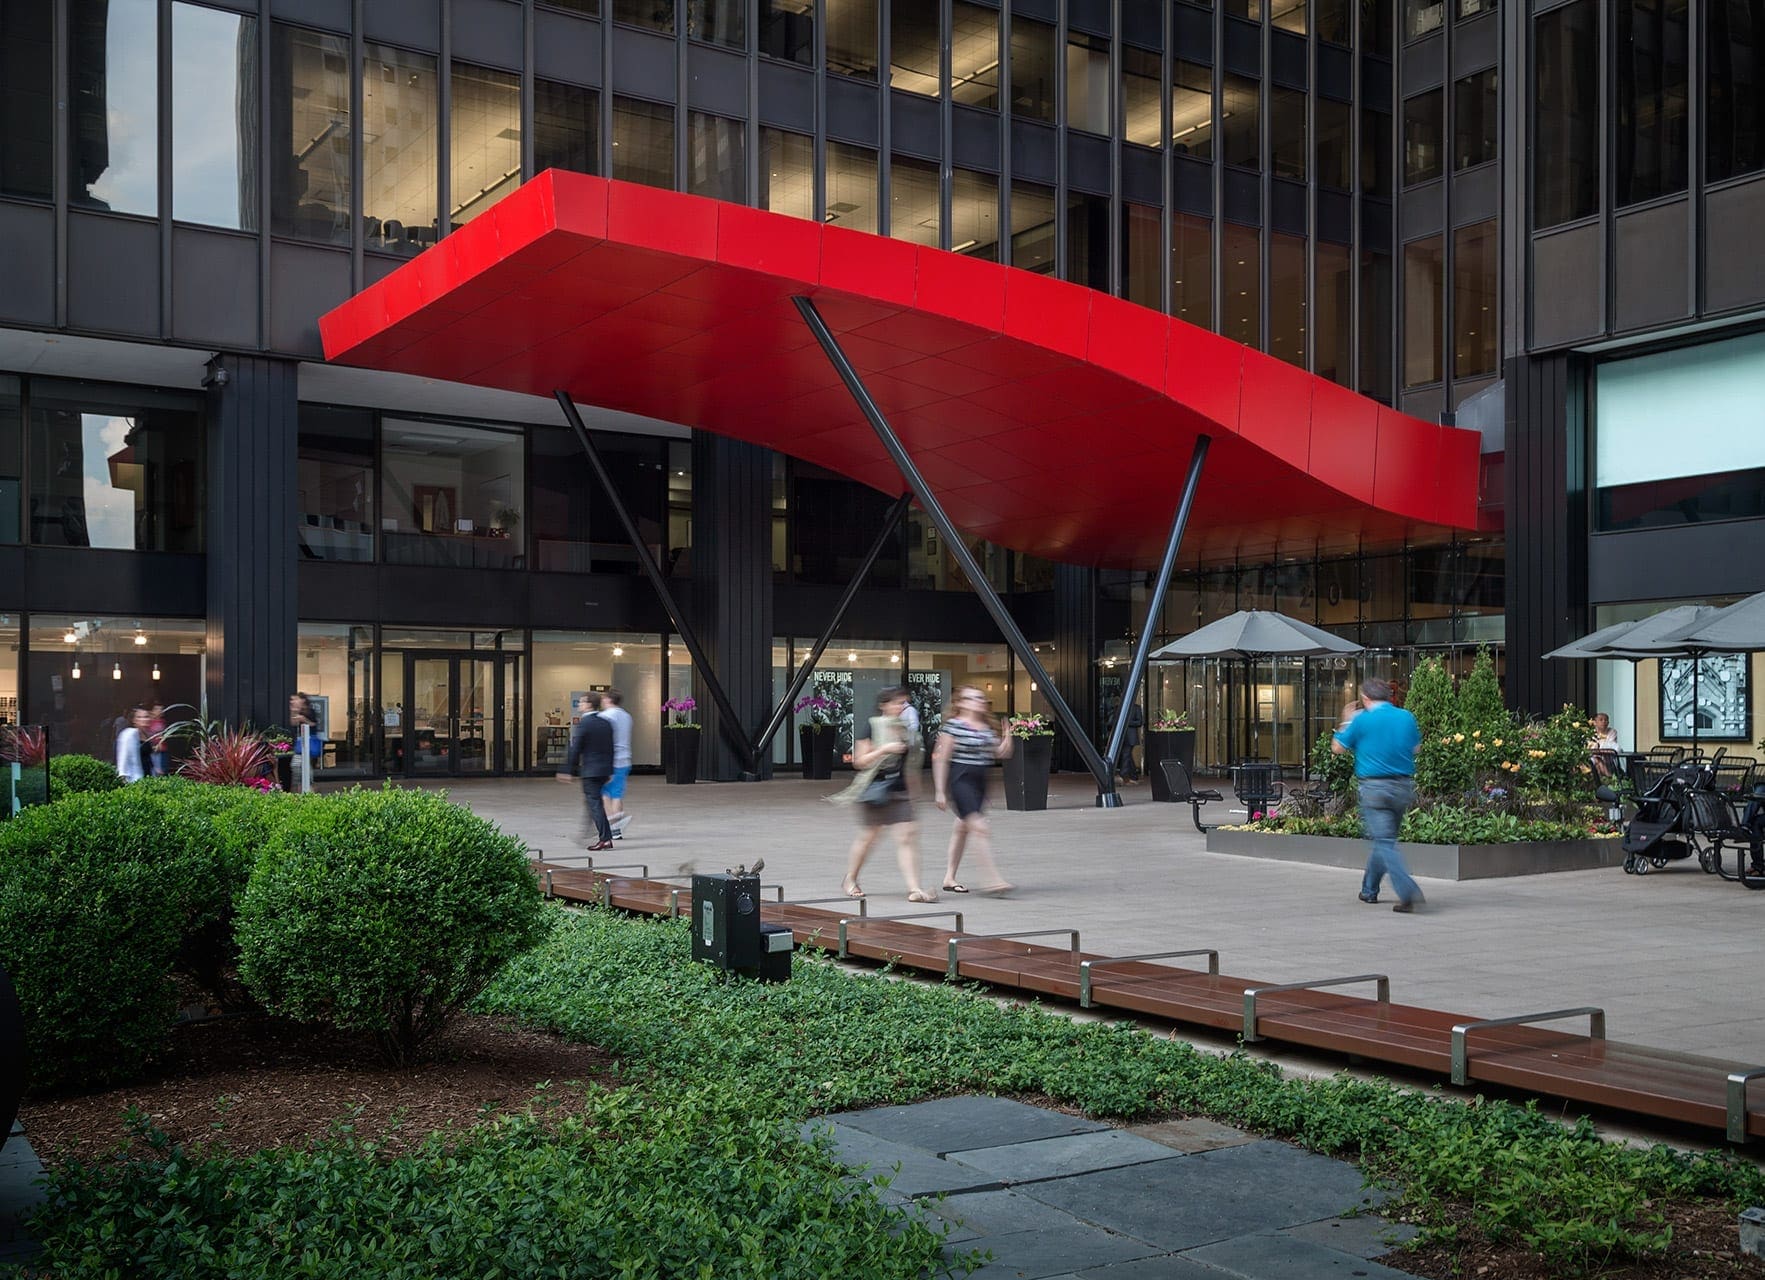 The red aluminum canopy for Michigan Avenue Plaza in Chicago.